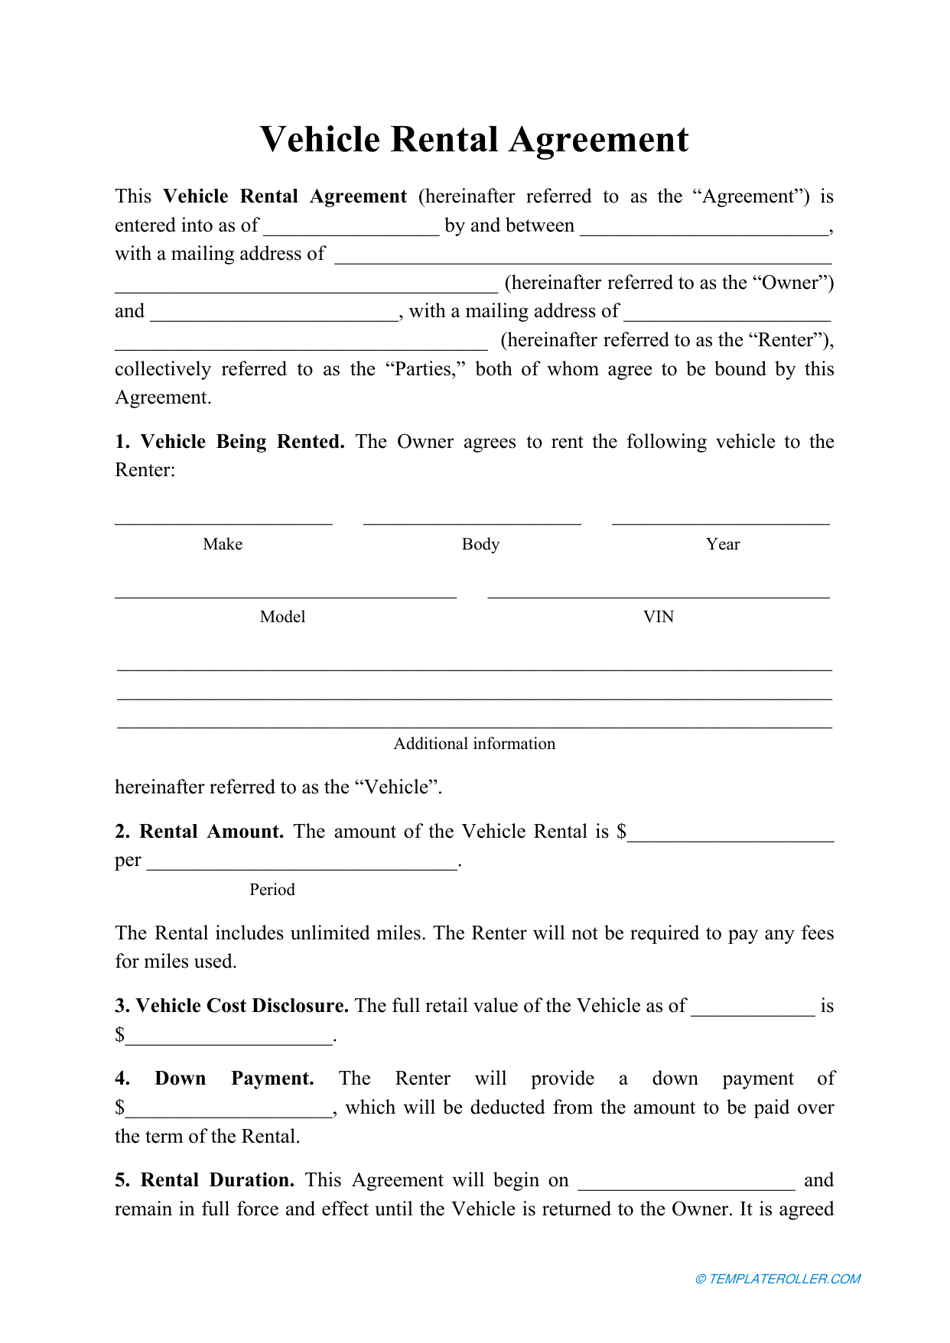 Vehicle Rental Agreement Template, Page 1